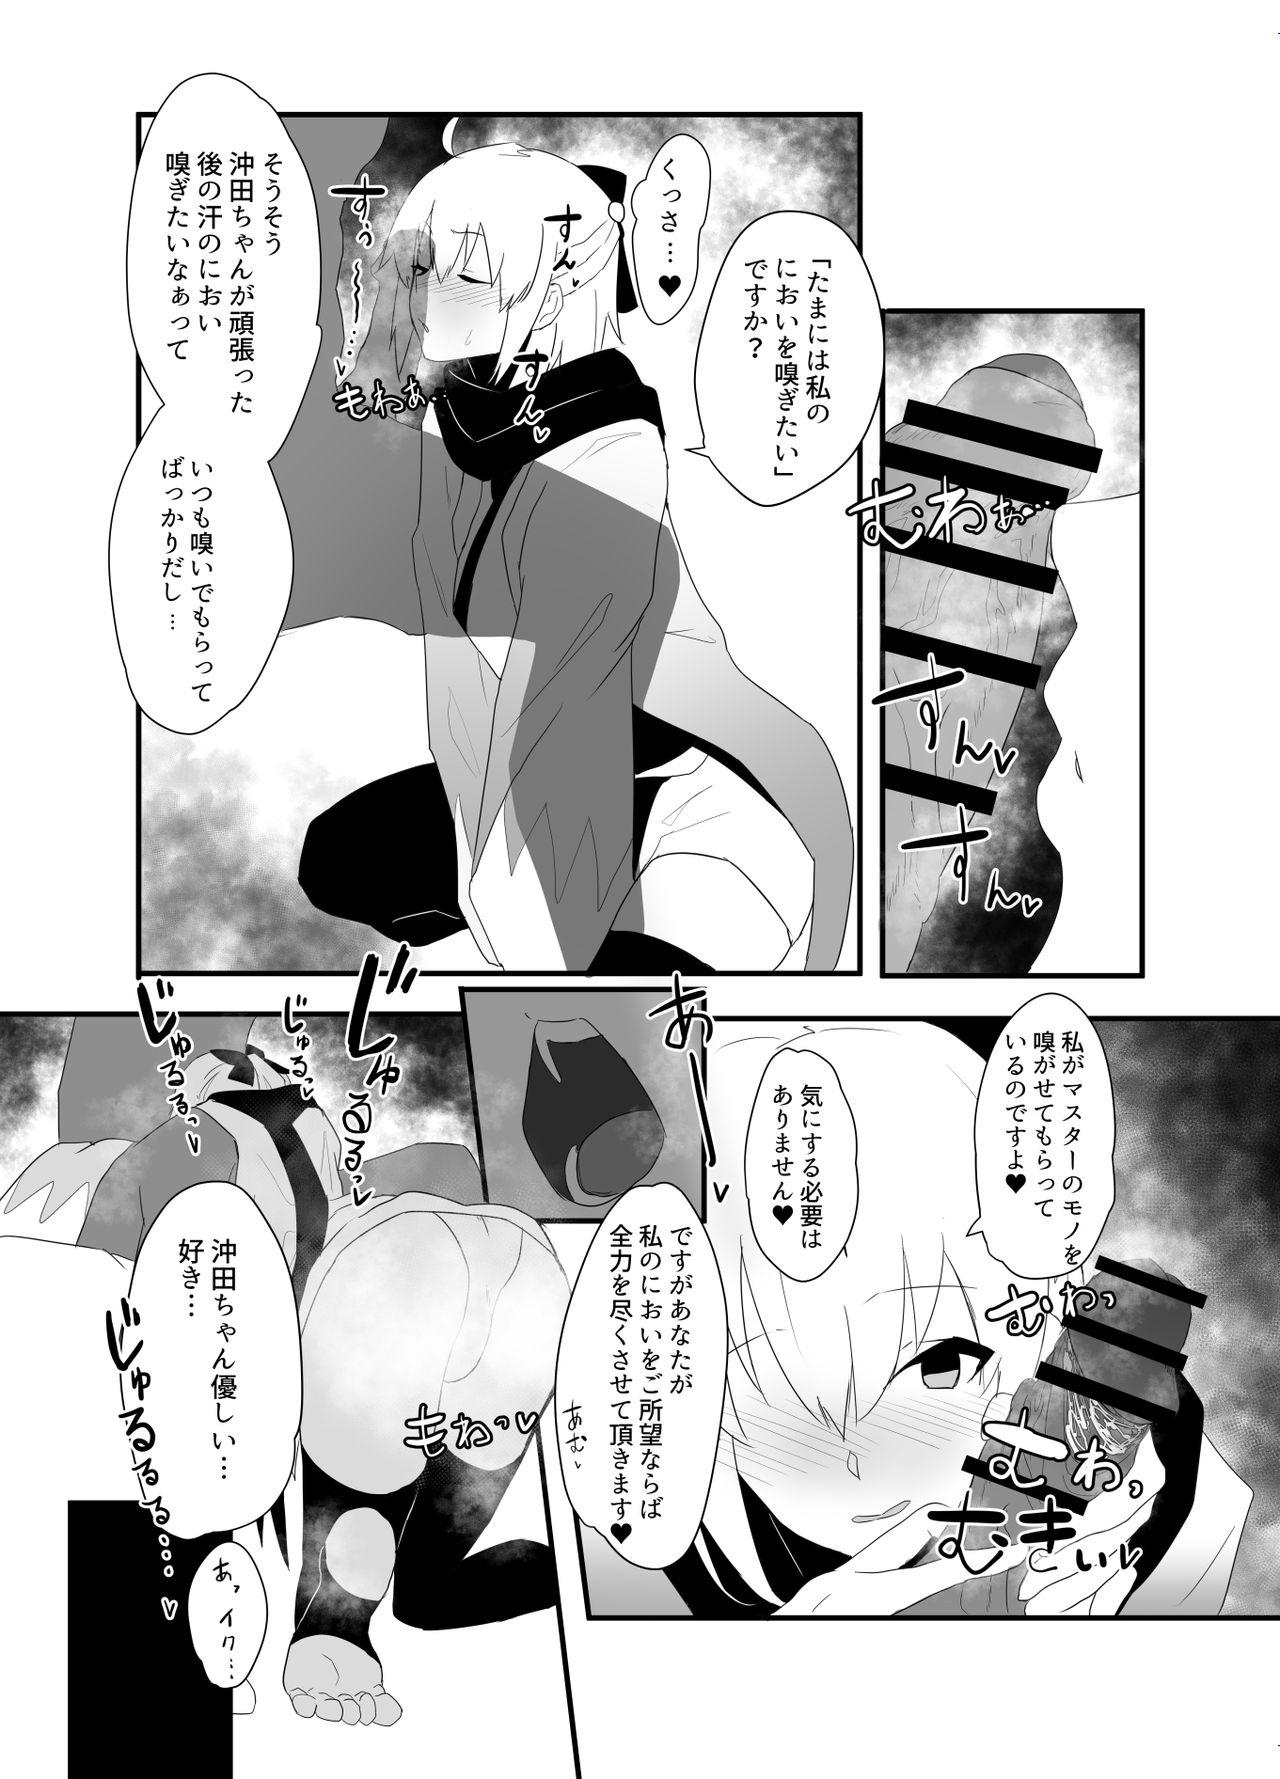 Jeans Dosukebe Saber Wars 3 - Fate grand order Penis Sucking - Page 13